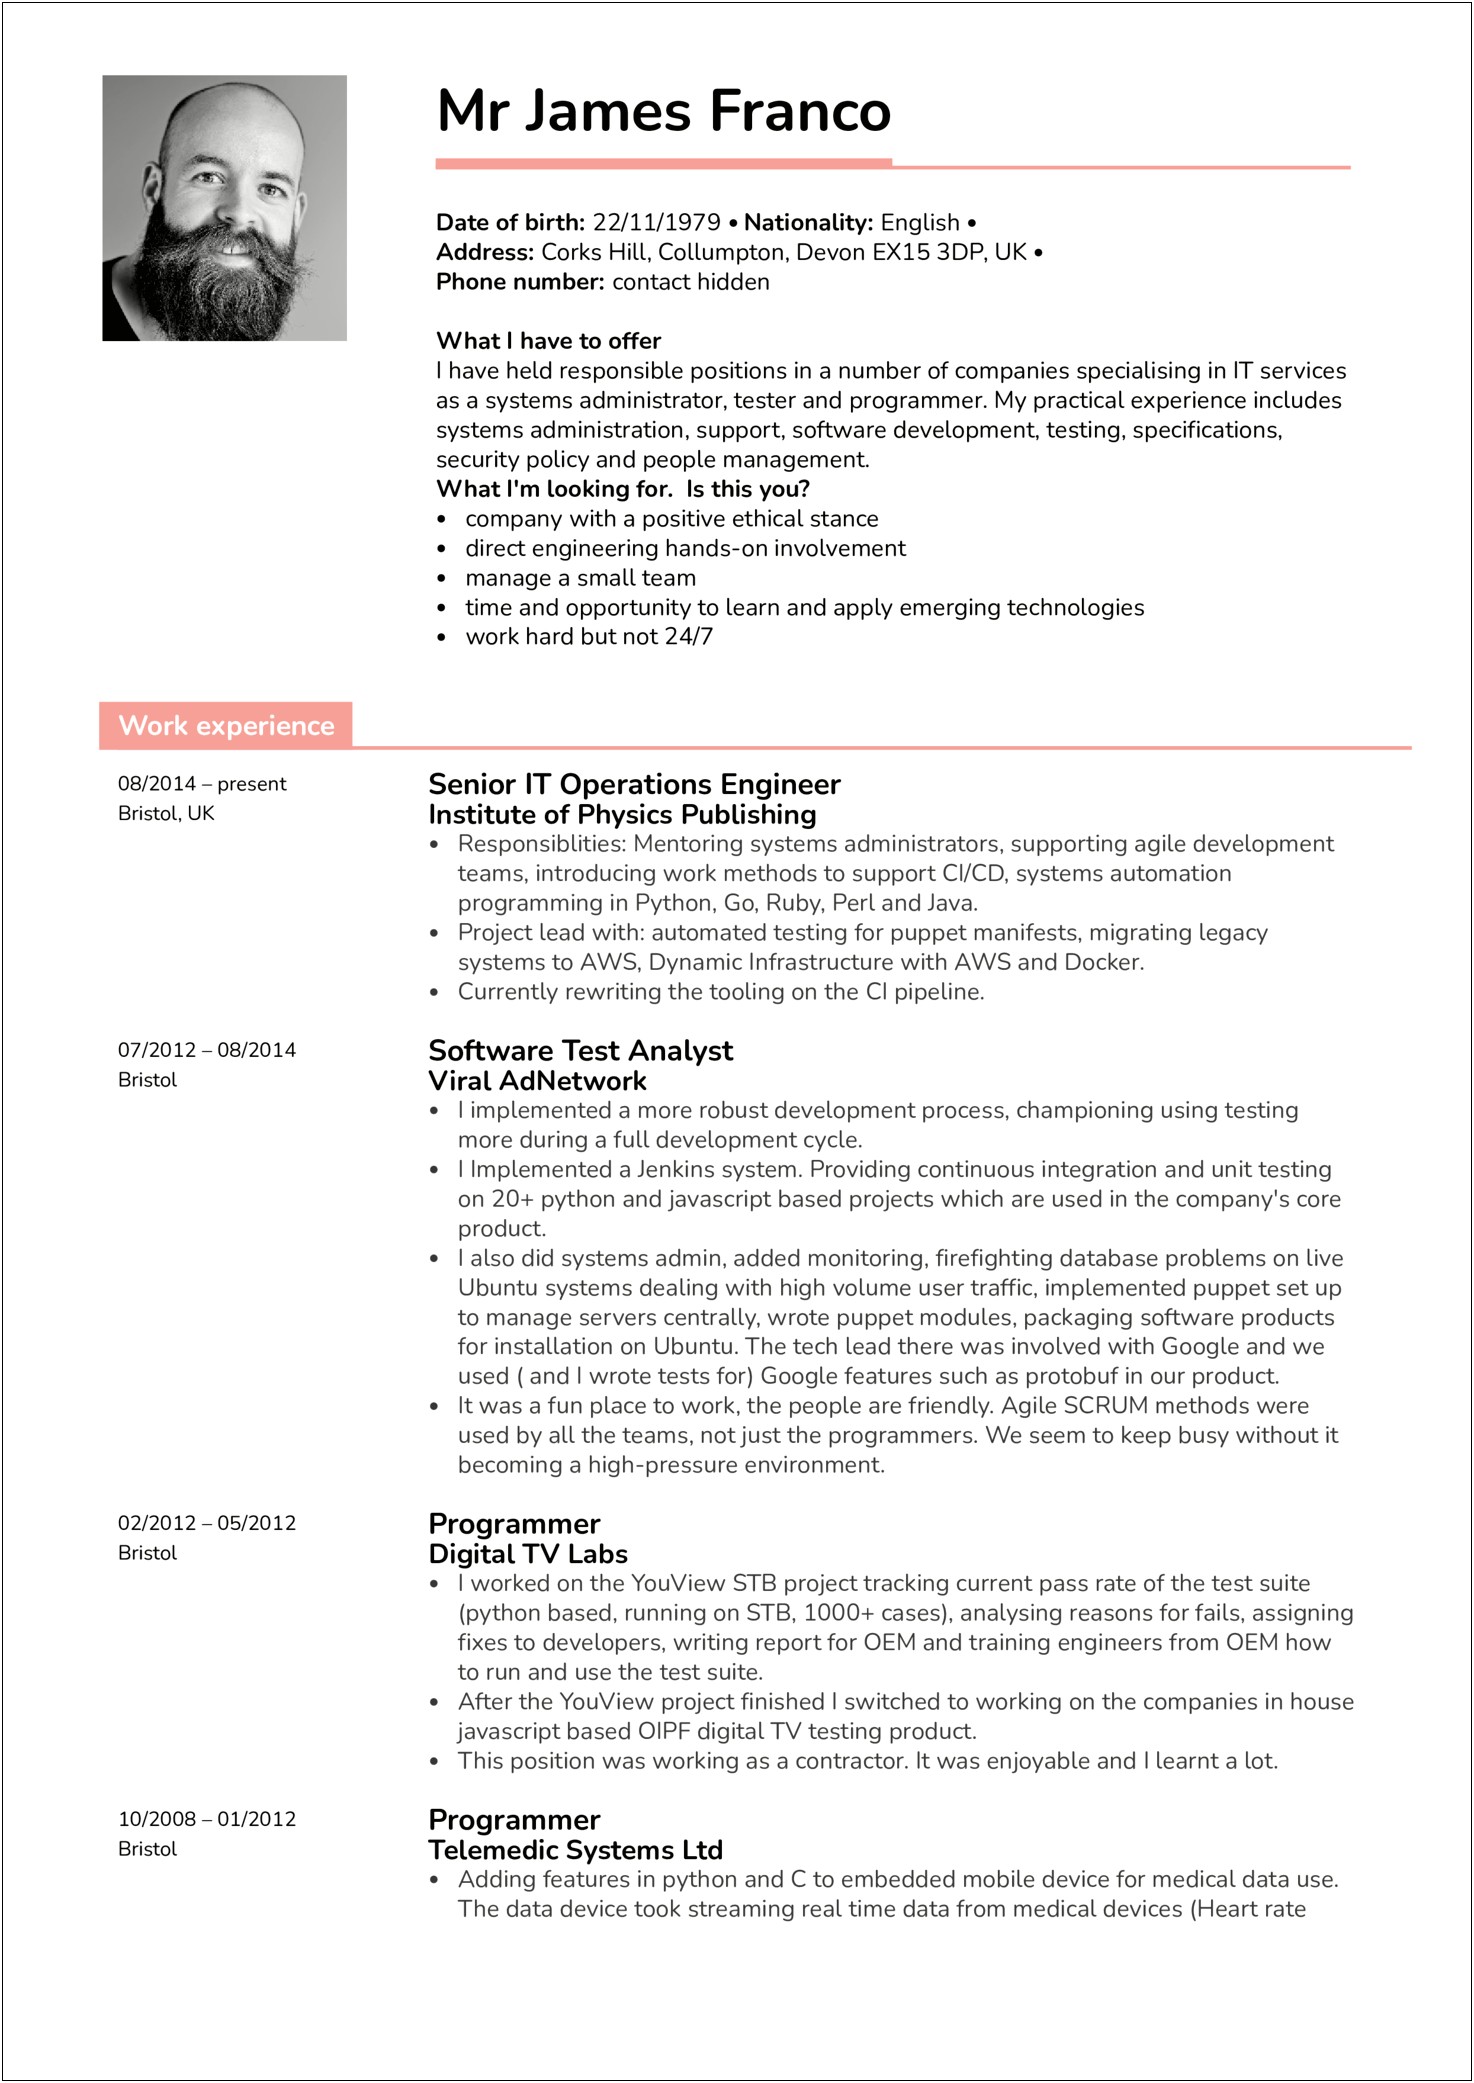 Resume Objective Statement Examples Aws Engineer